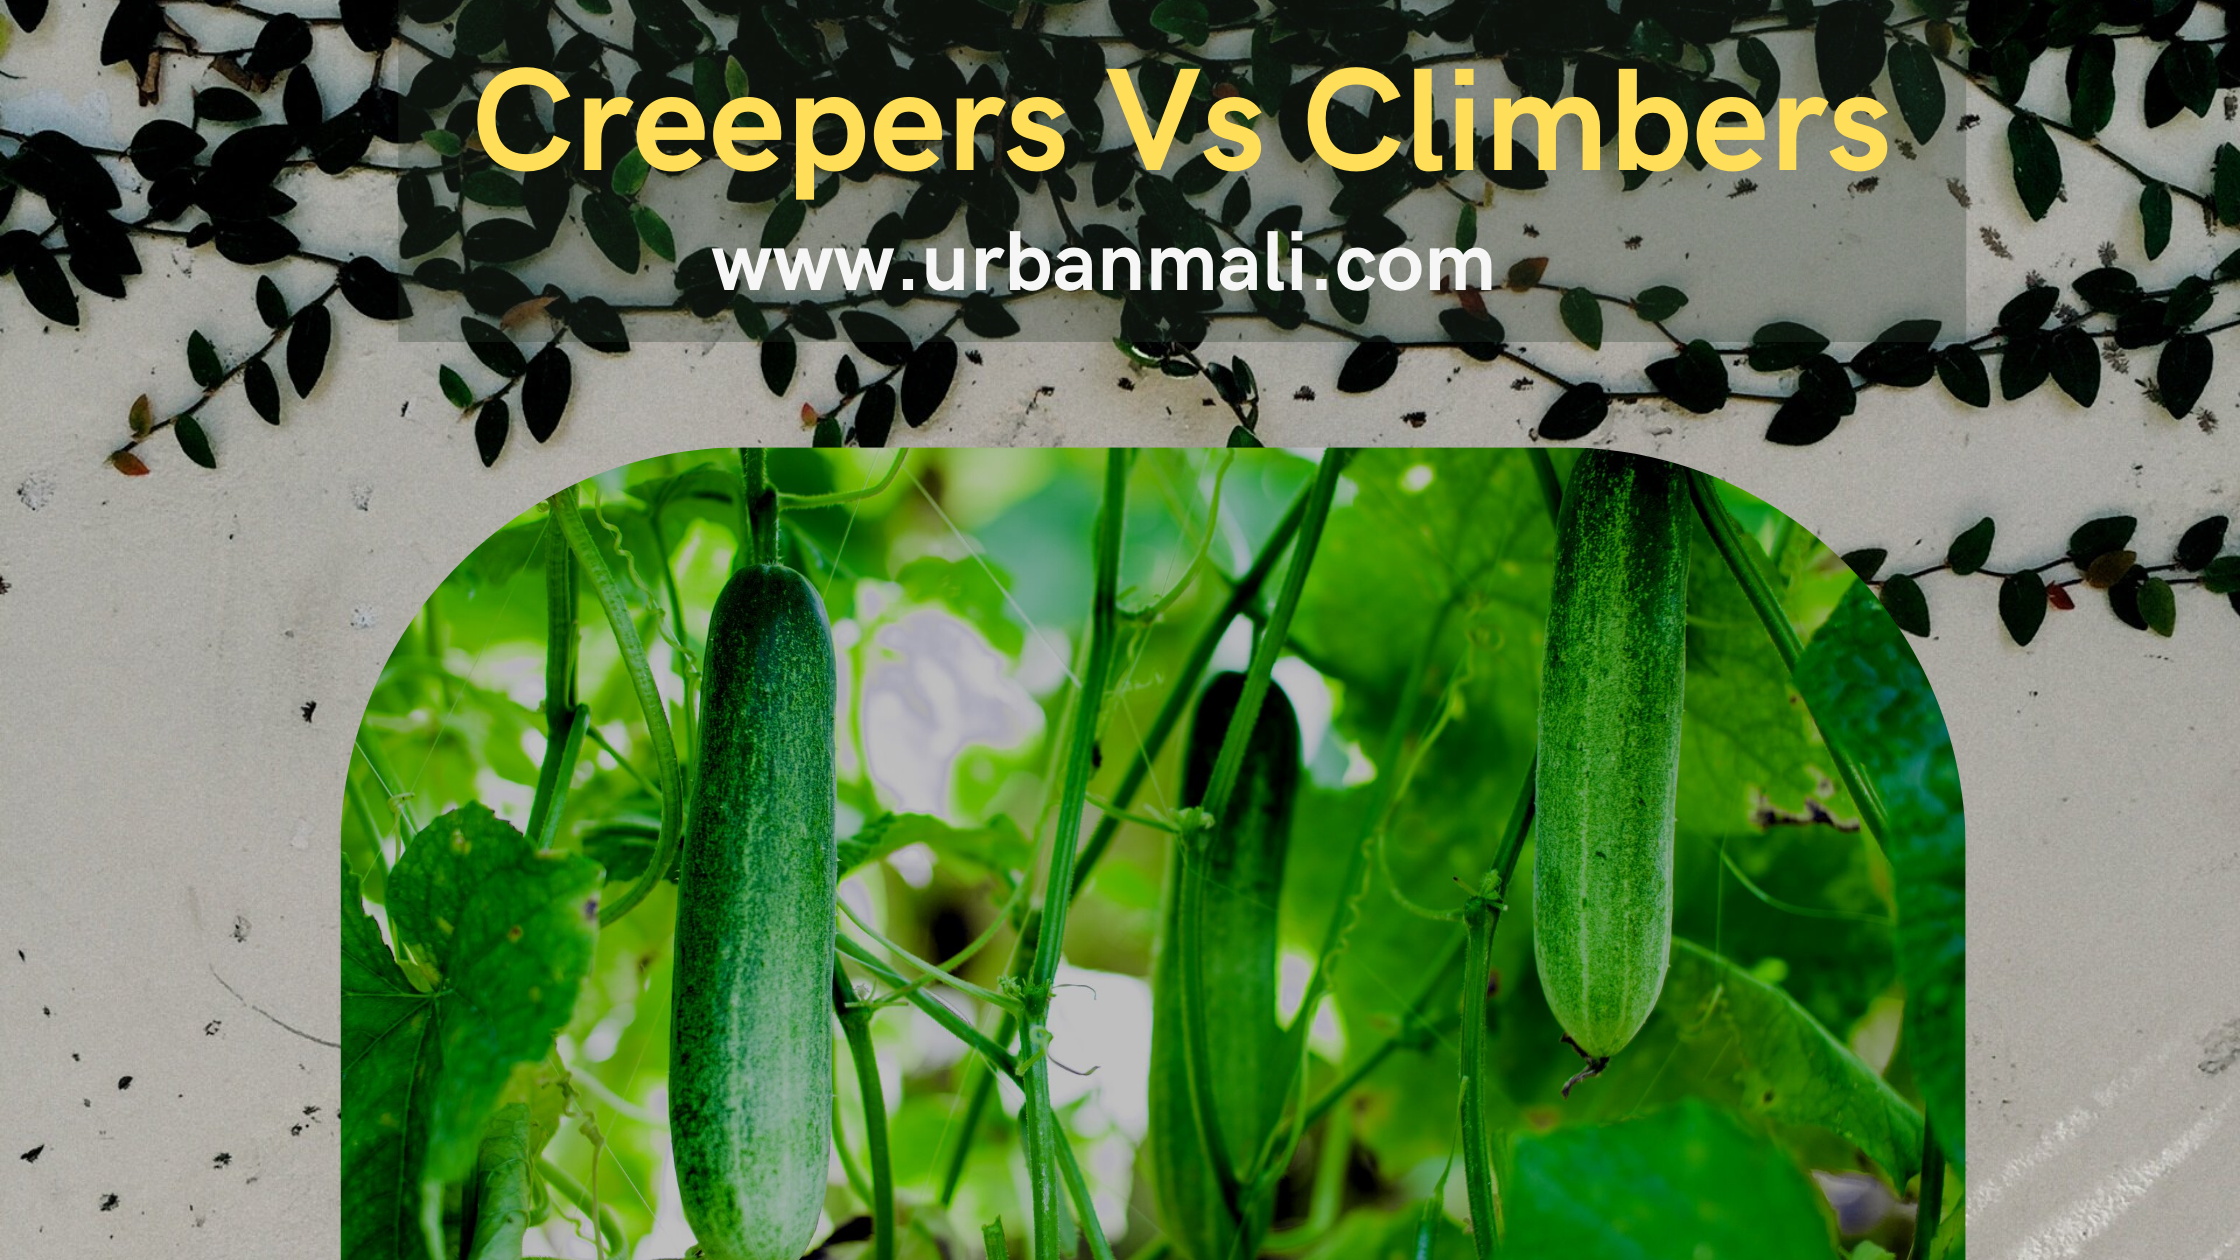 What is the difference between a climber and a creeper? - Quora